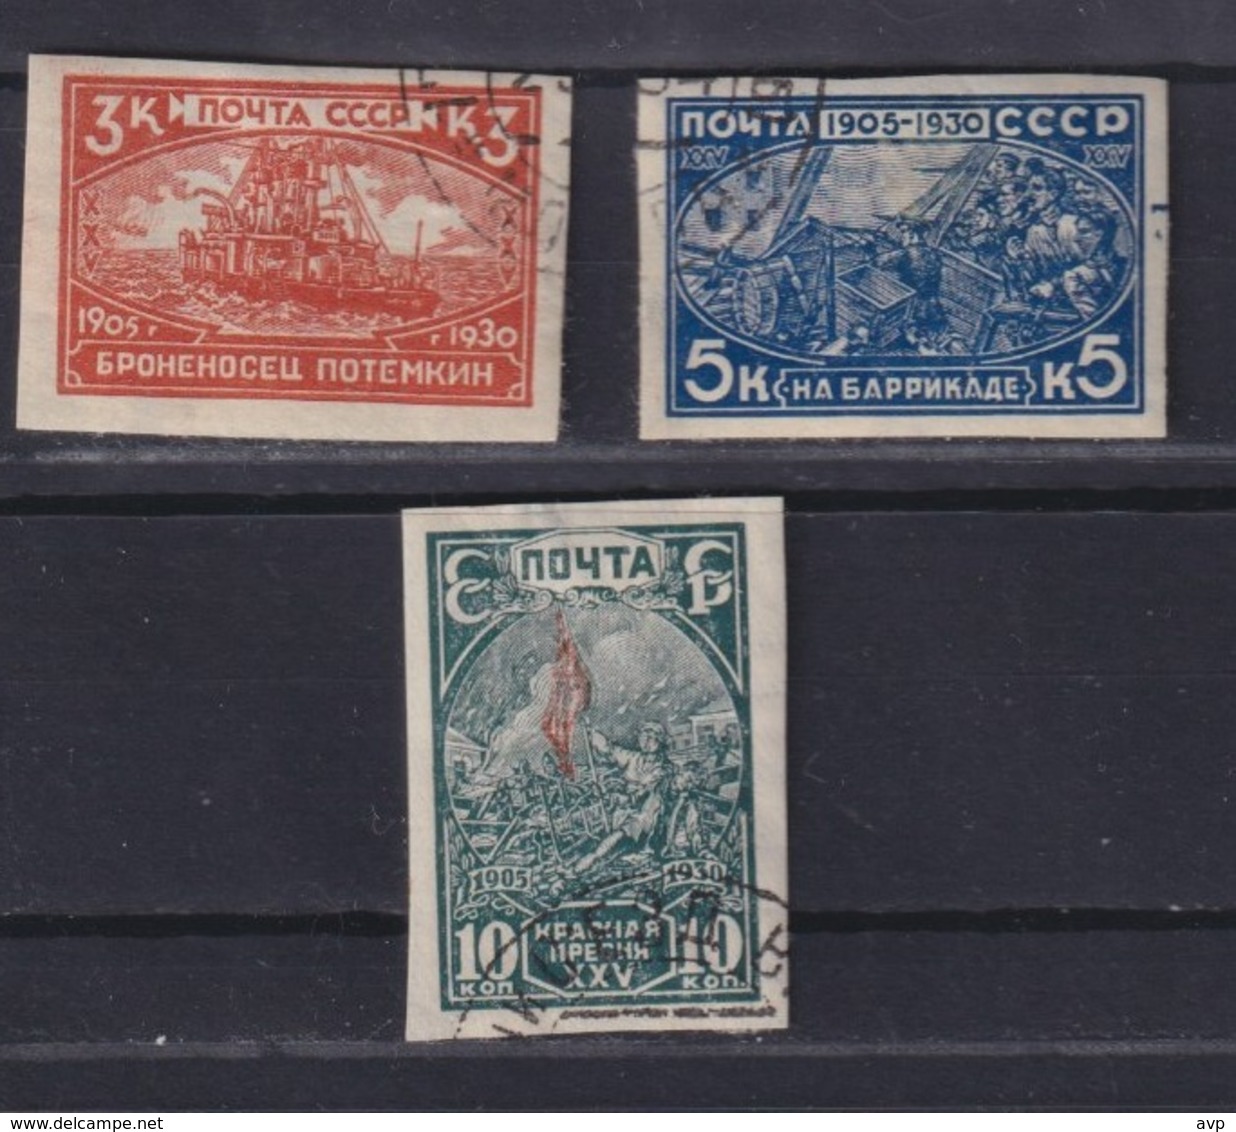 USSR 1930 Michel 394B-396B 25th Anniversary Of Revolution Of 1905. Used - Used Stamps